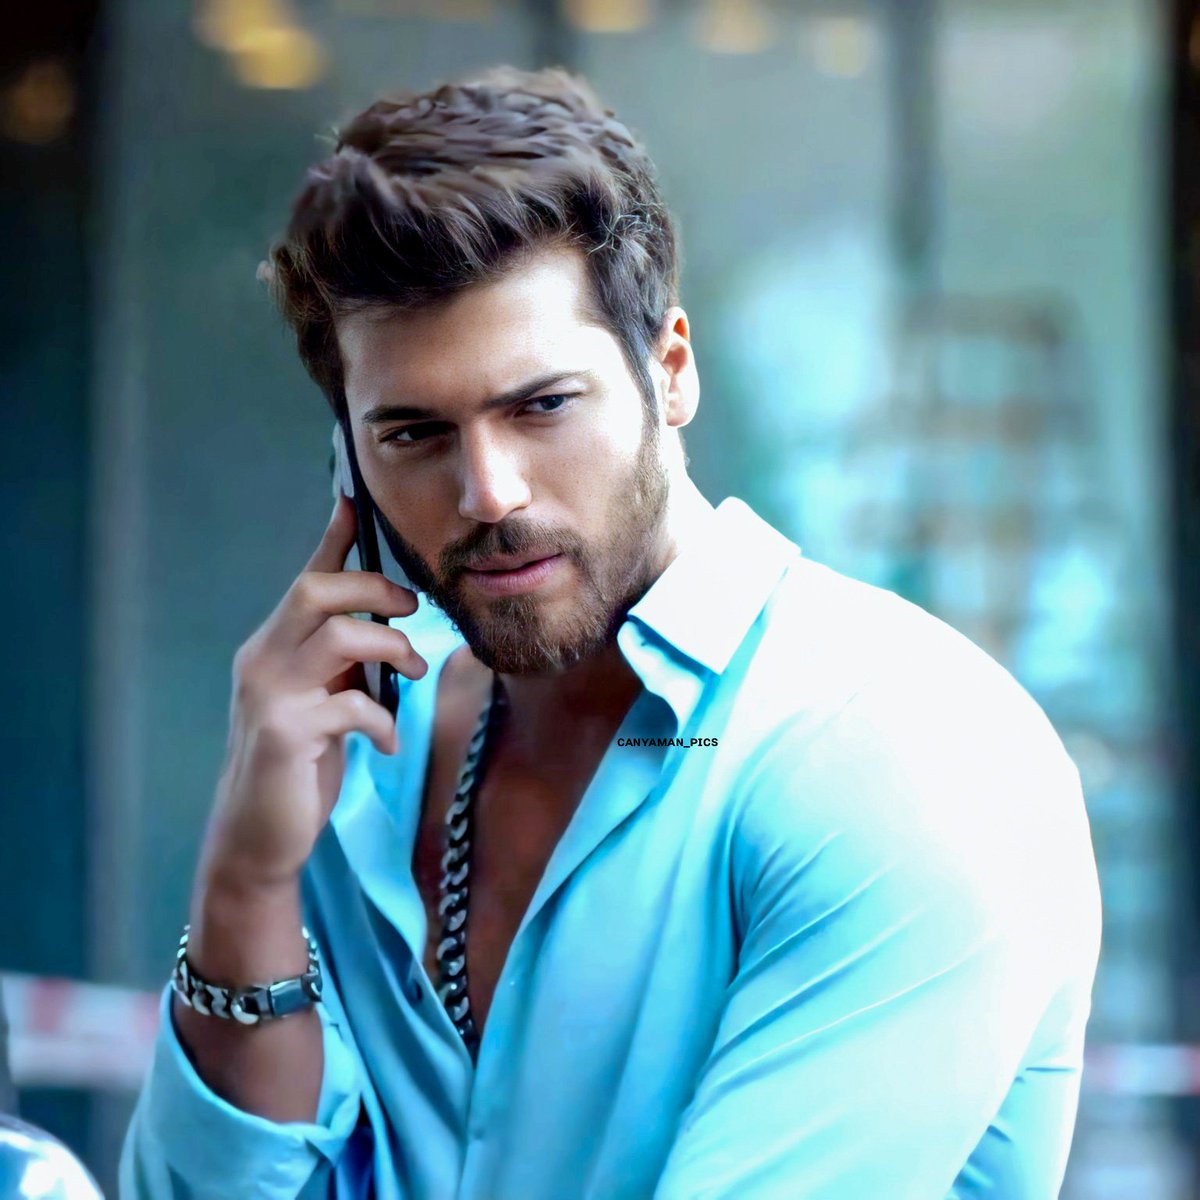 Can Yaman | Beard styles, Canning, Hairstyle